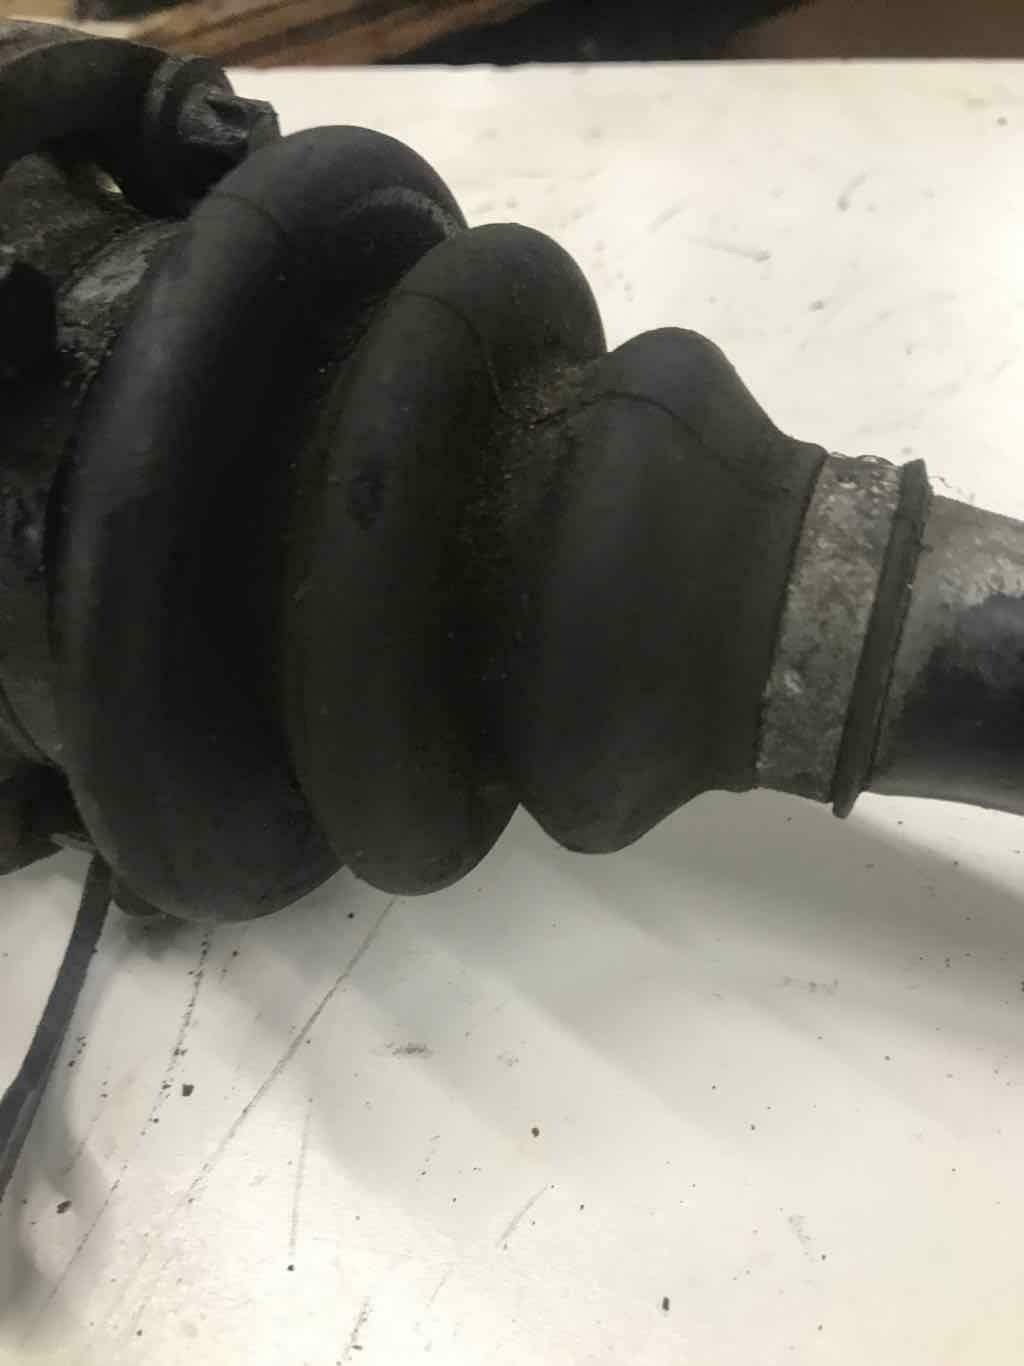 Axle Shaft BMW 318 SERIES Right 95 96 97 98 99